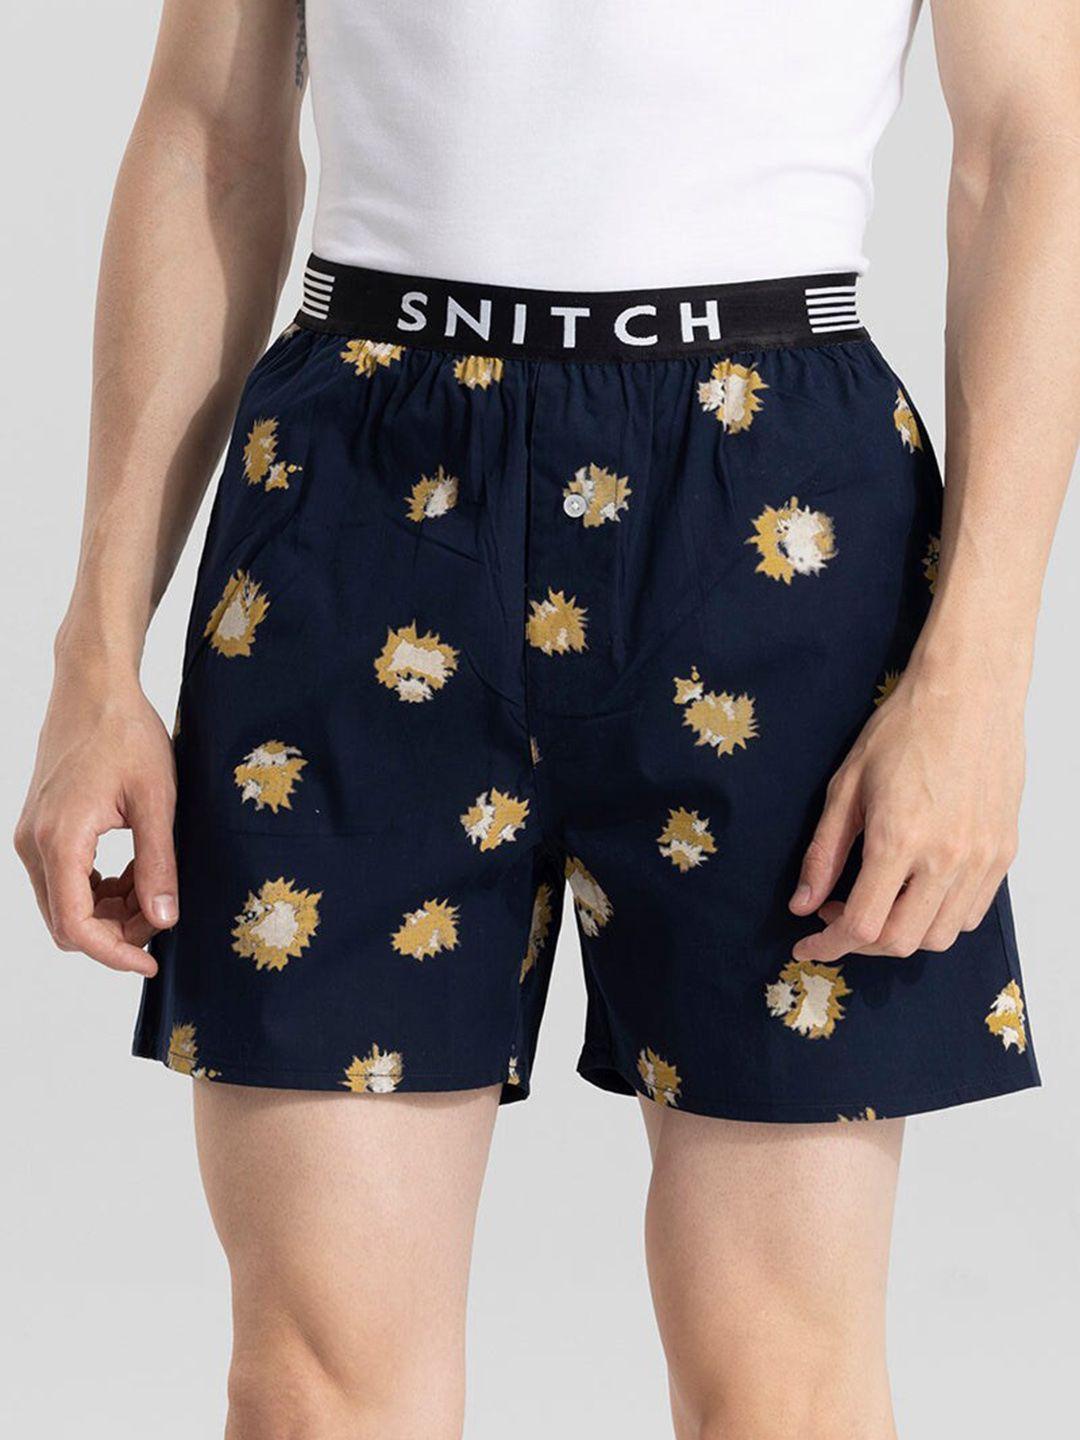 snitch navy blue & beige printed cotton outer elastic boxers 4msbx9217-02-s